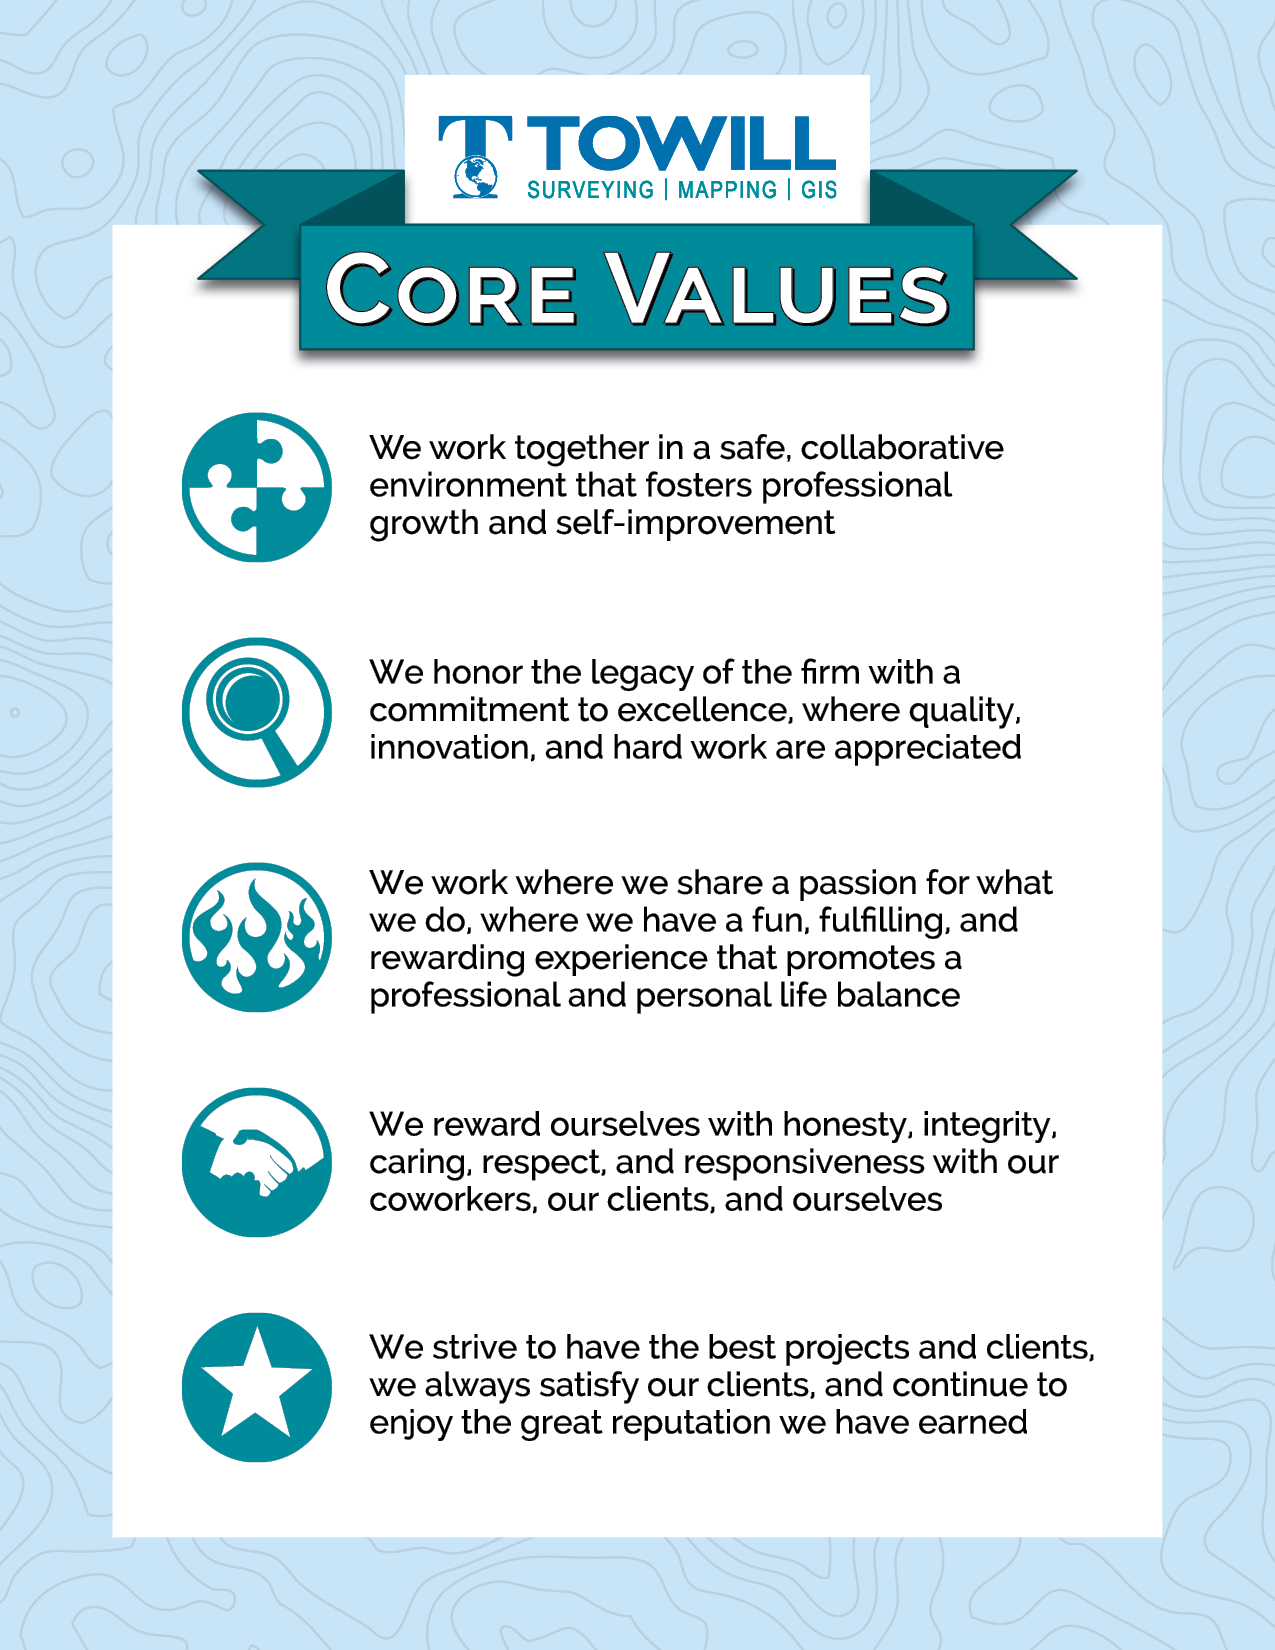 Towill's Core Values